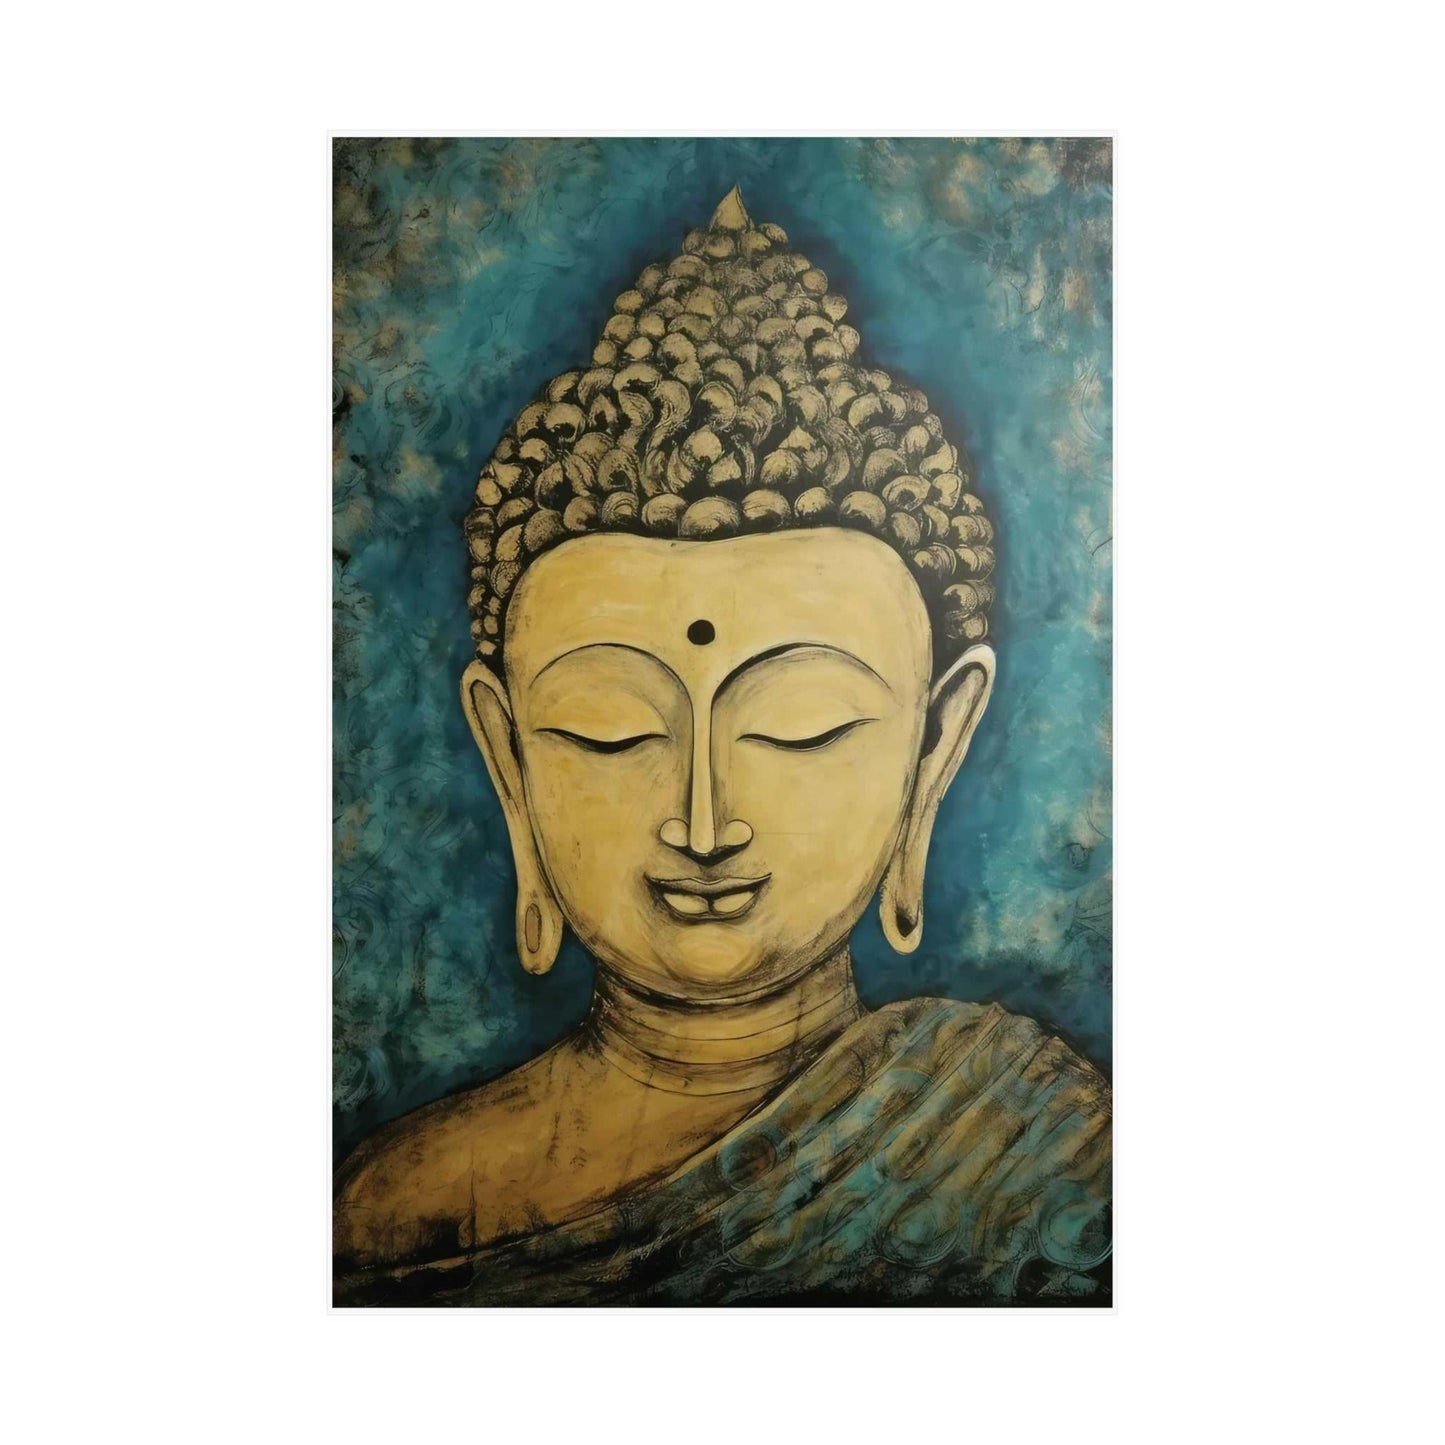 ZenArtBliss.com's Kentucky Buddha in Art, featuring a golden Buddha Head against a teal background on matte paper, embodying peace and wisdom.